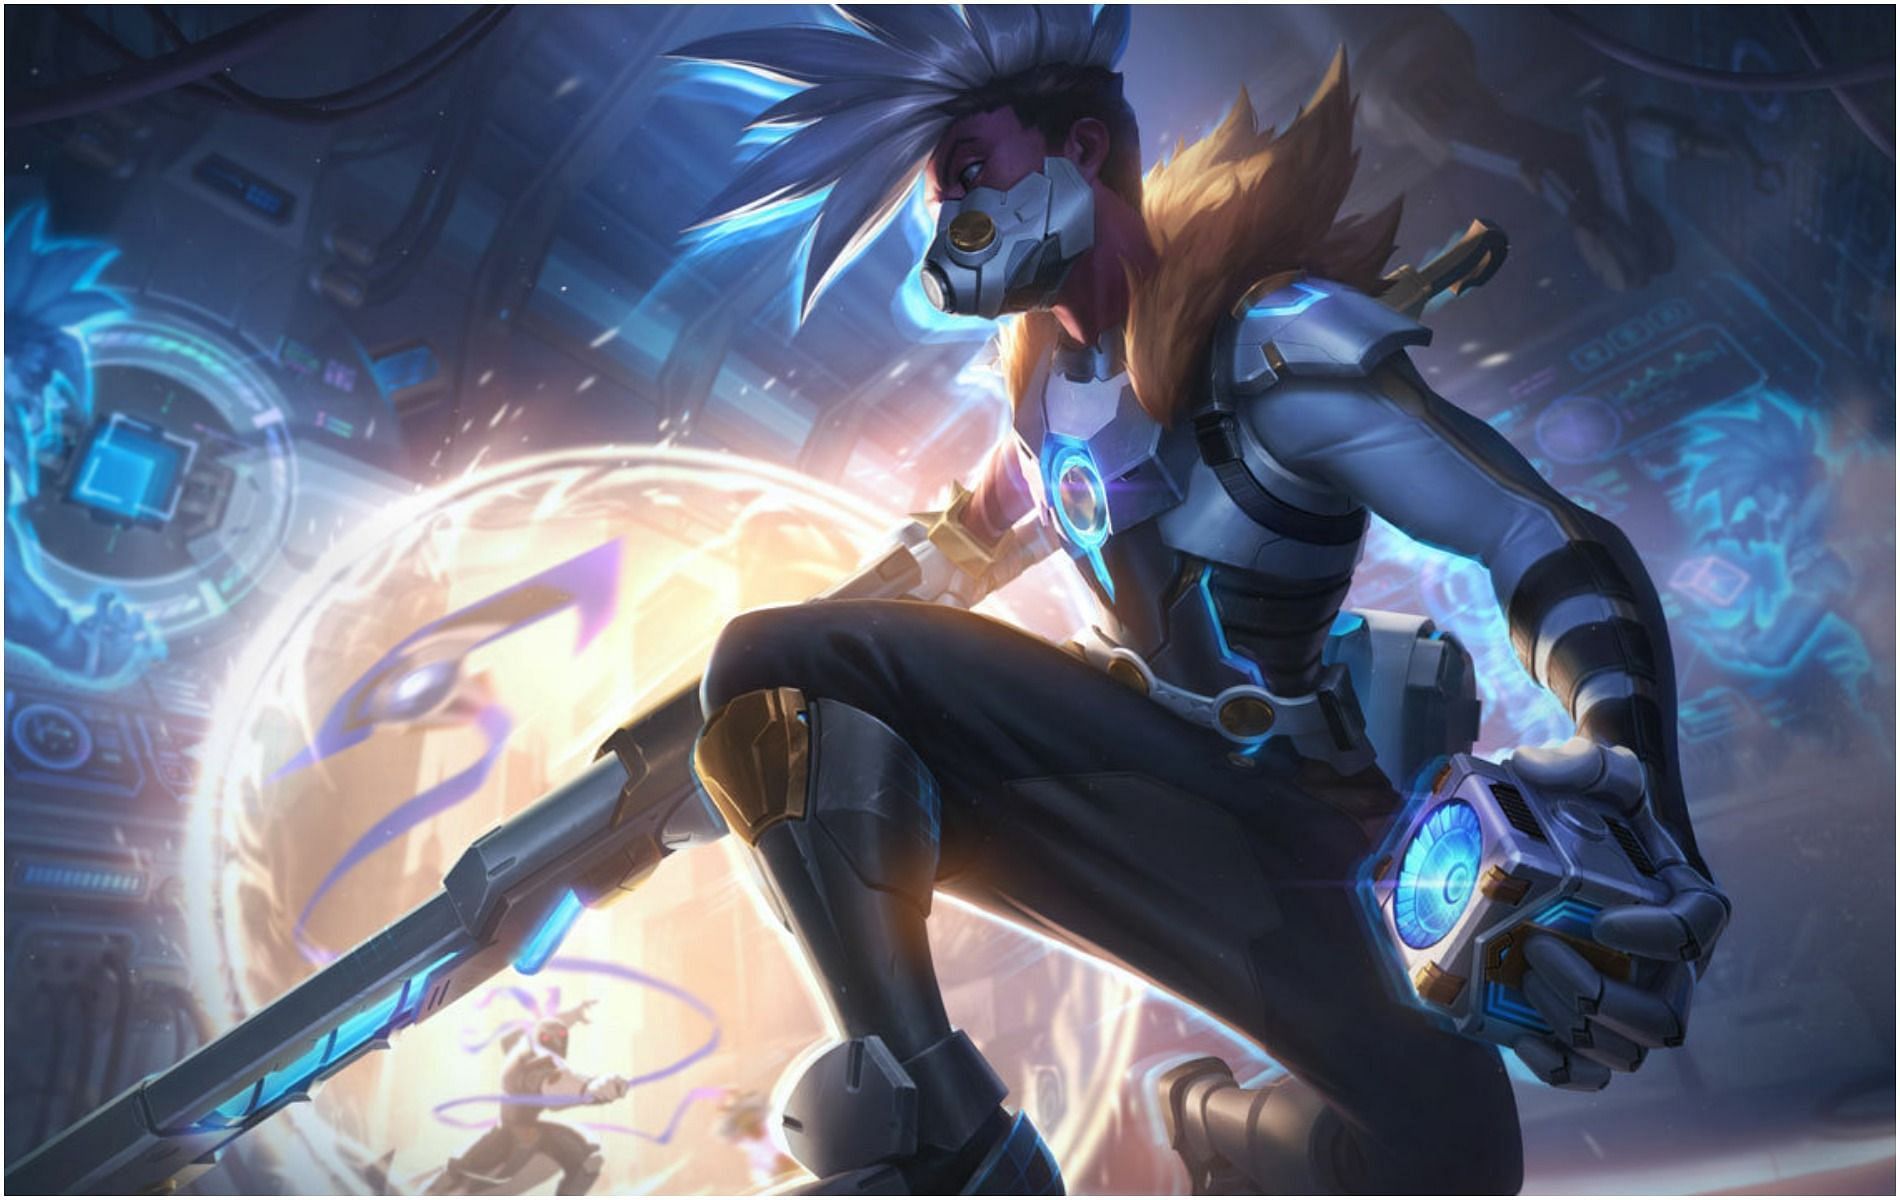 Teamfight Tactics patch 12.1 preview (Image via Riot Games)